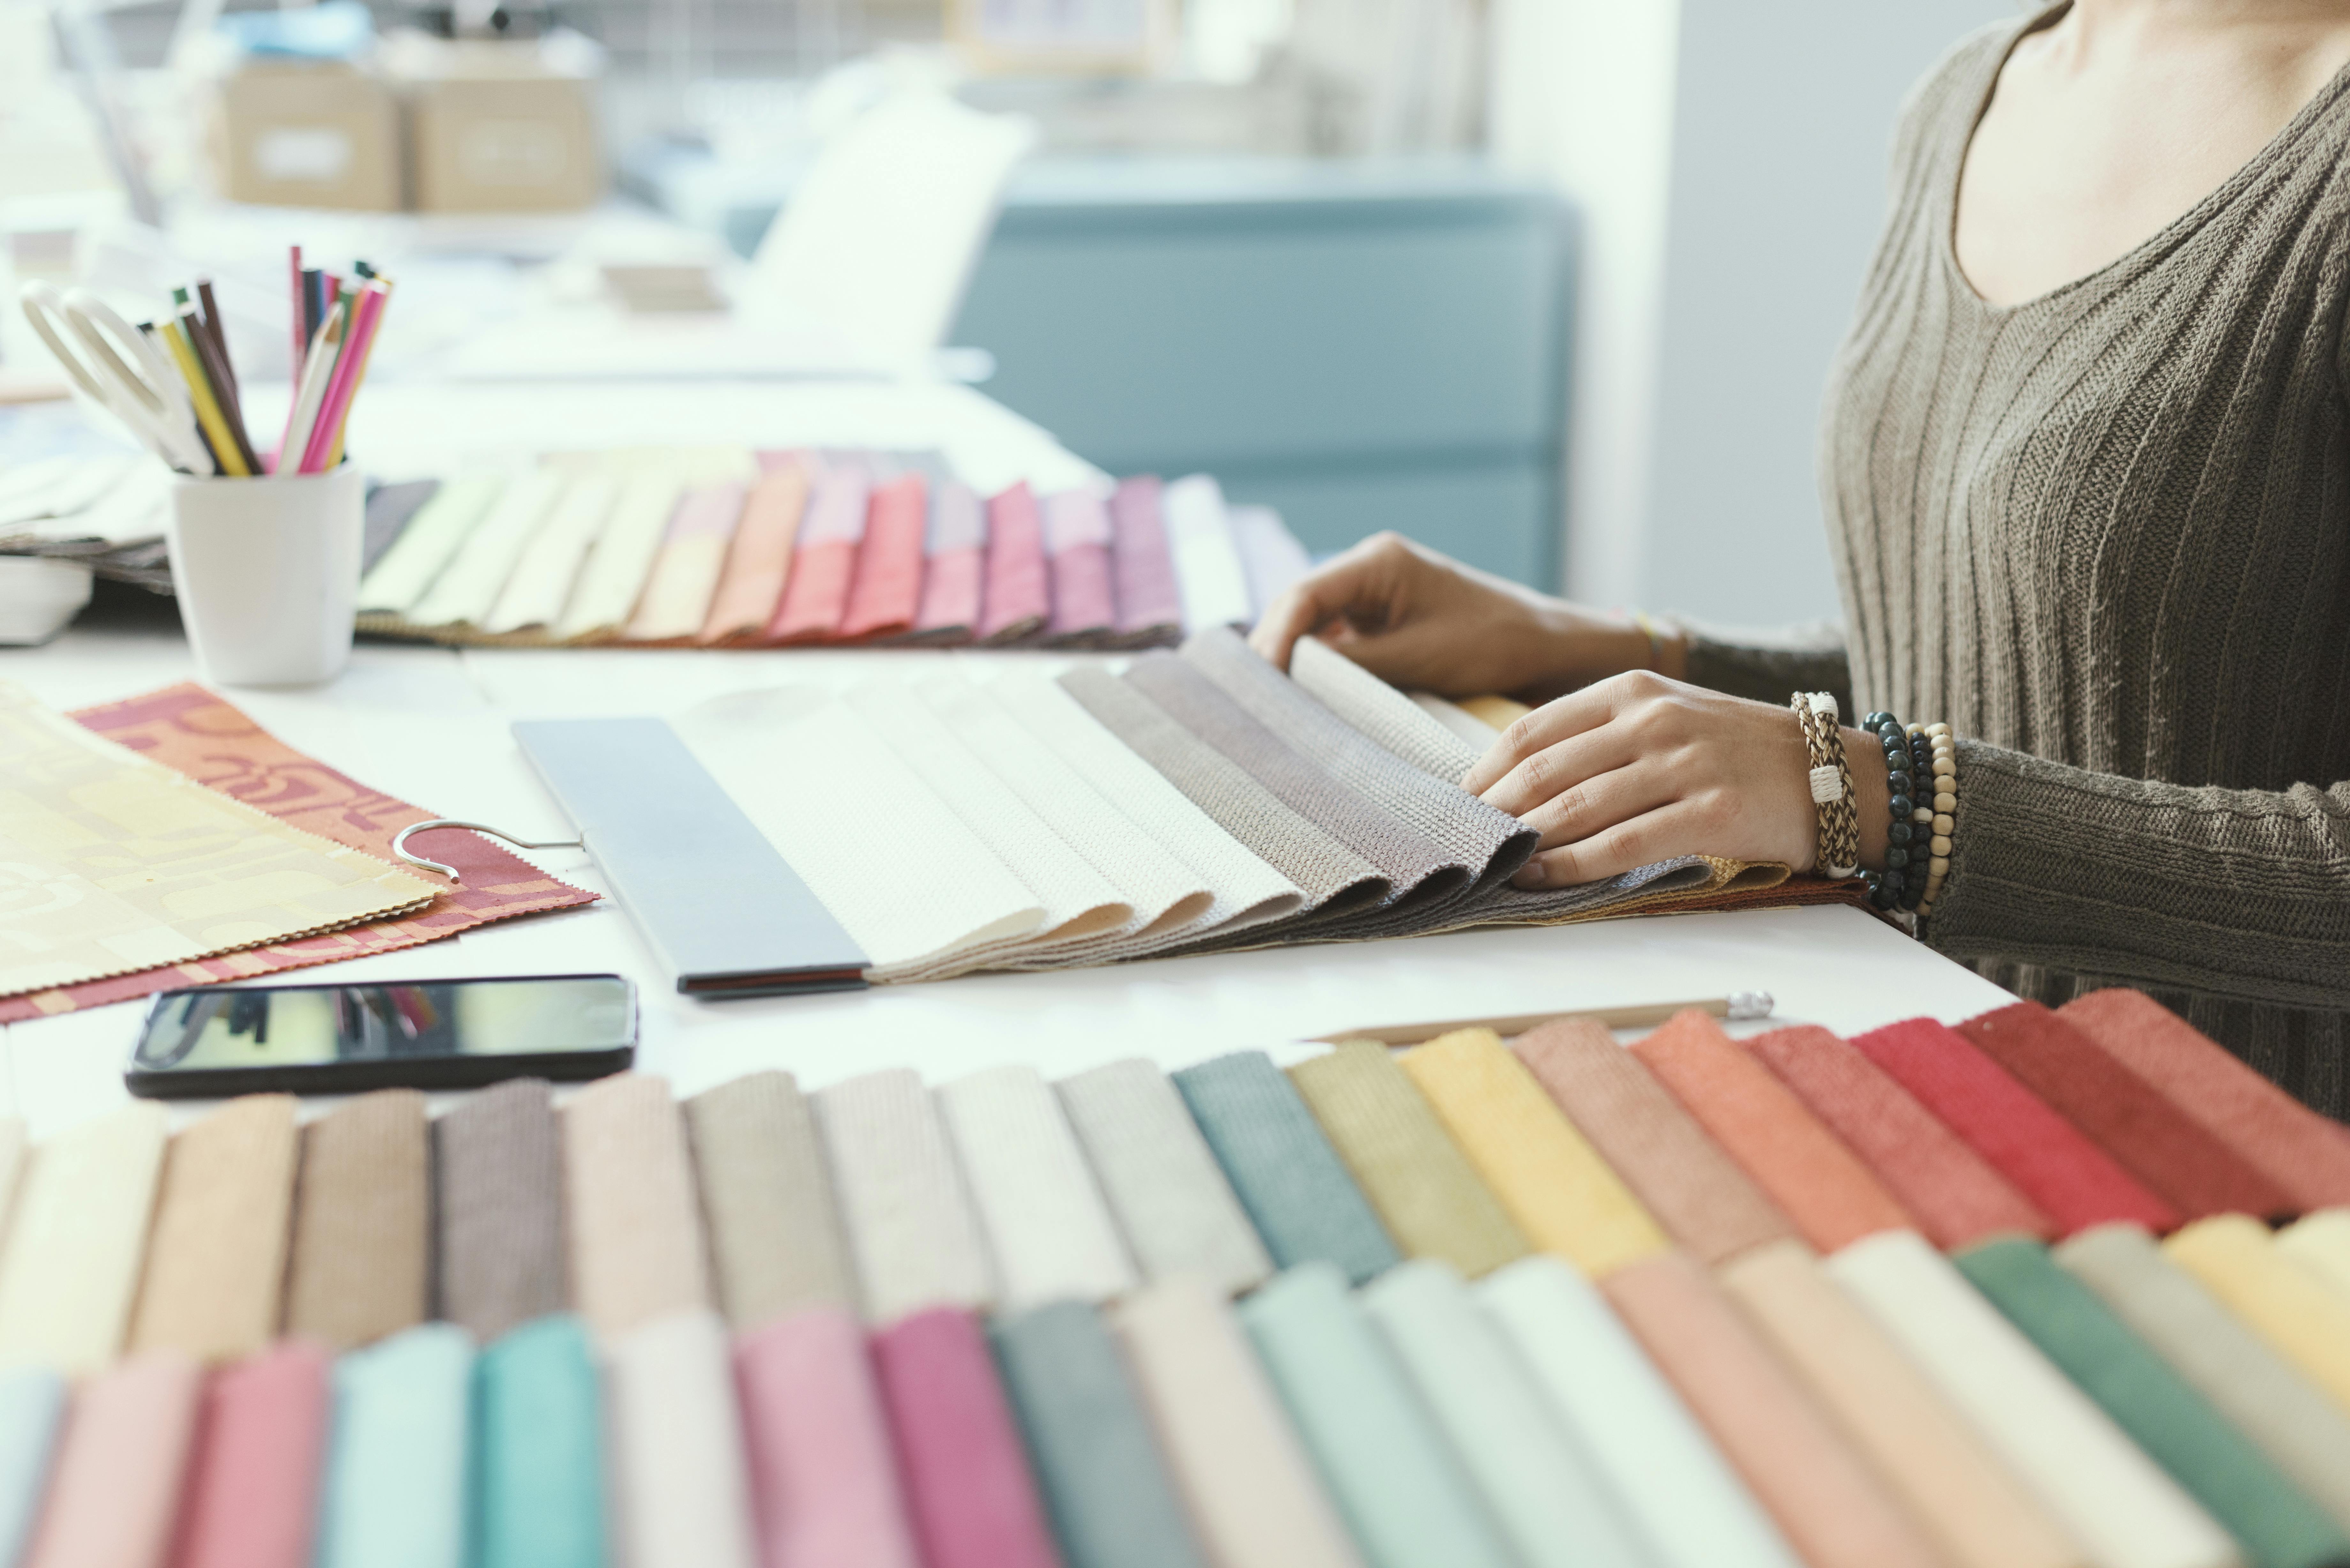  woman looking at multicolored fabric swatches at desk